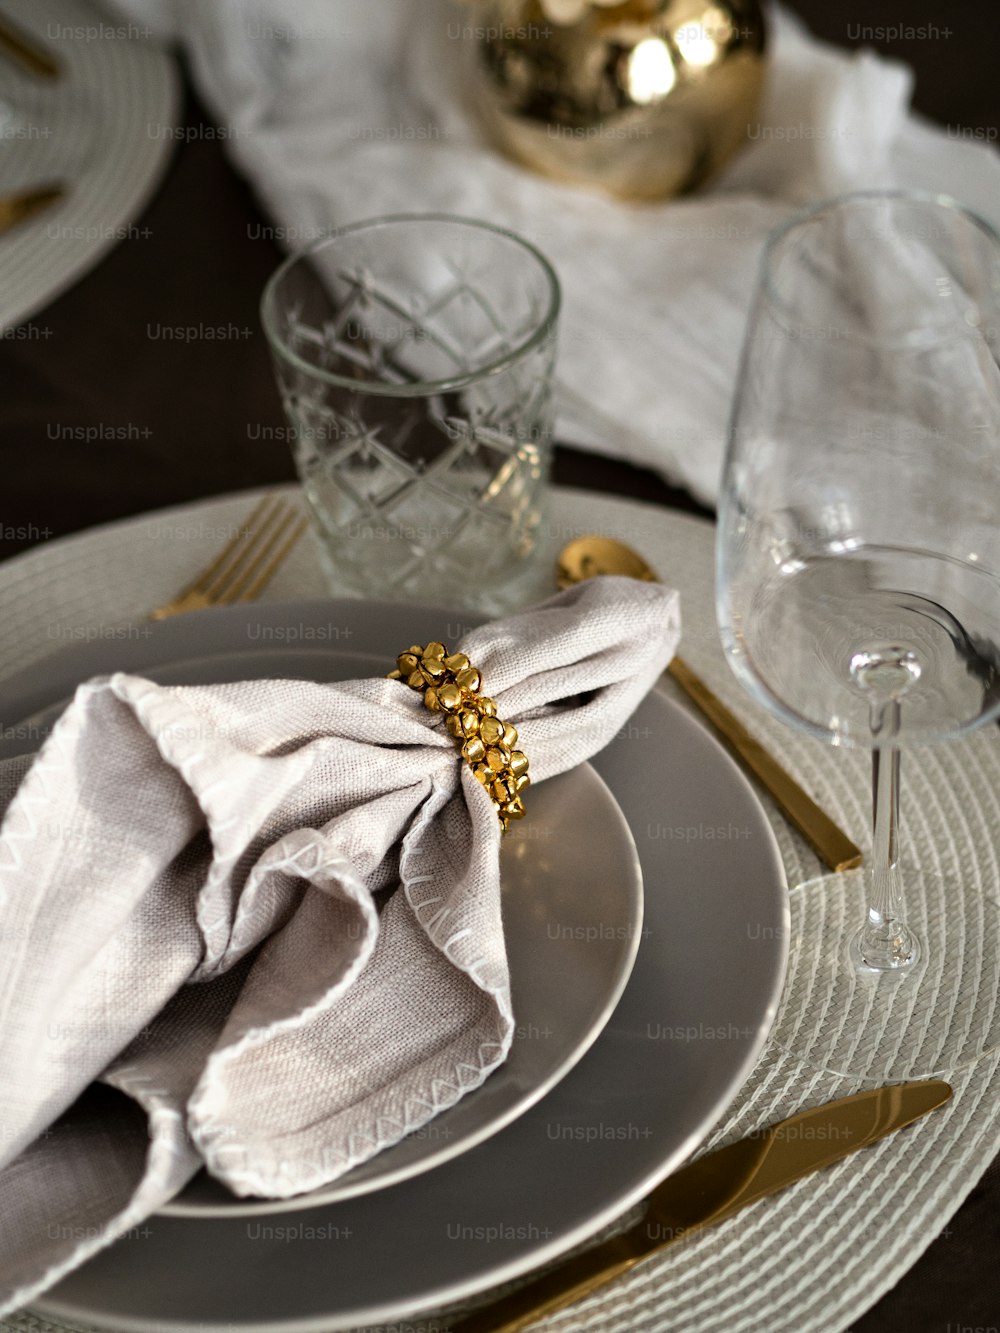 a place setting with a napkin and a wine glass